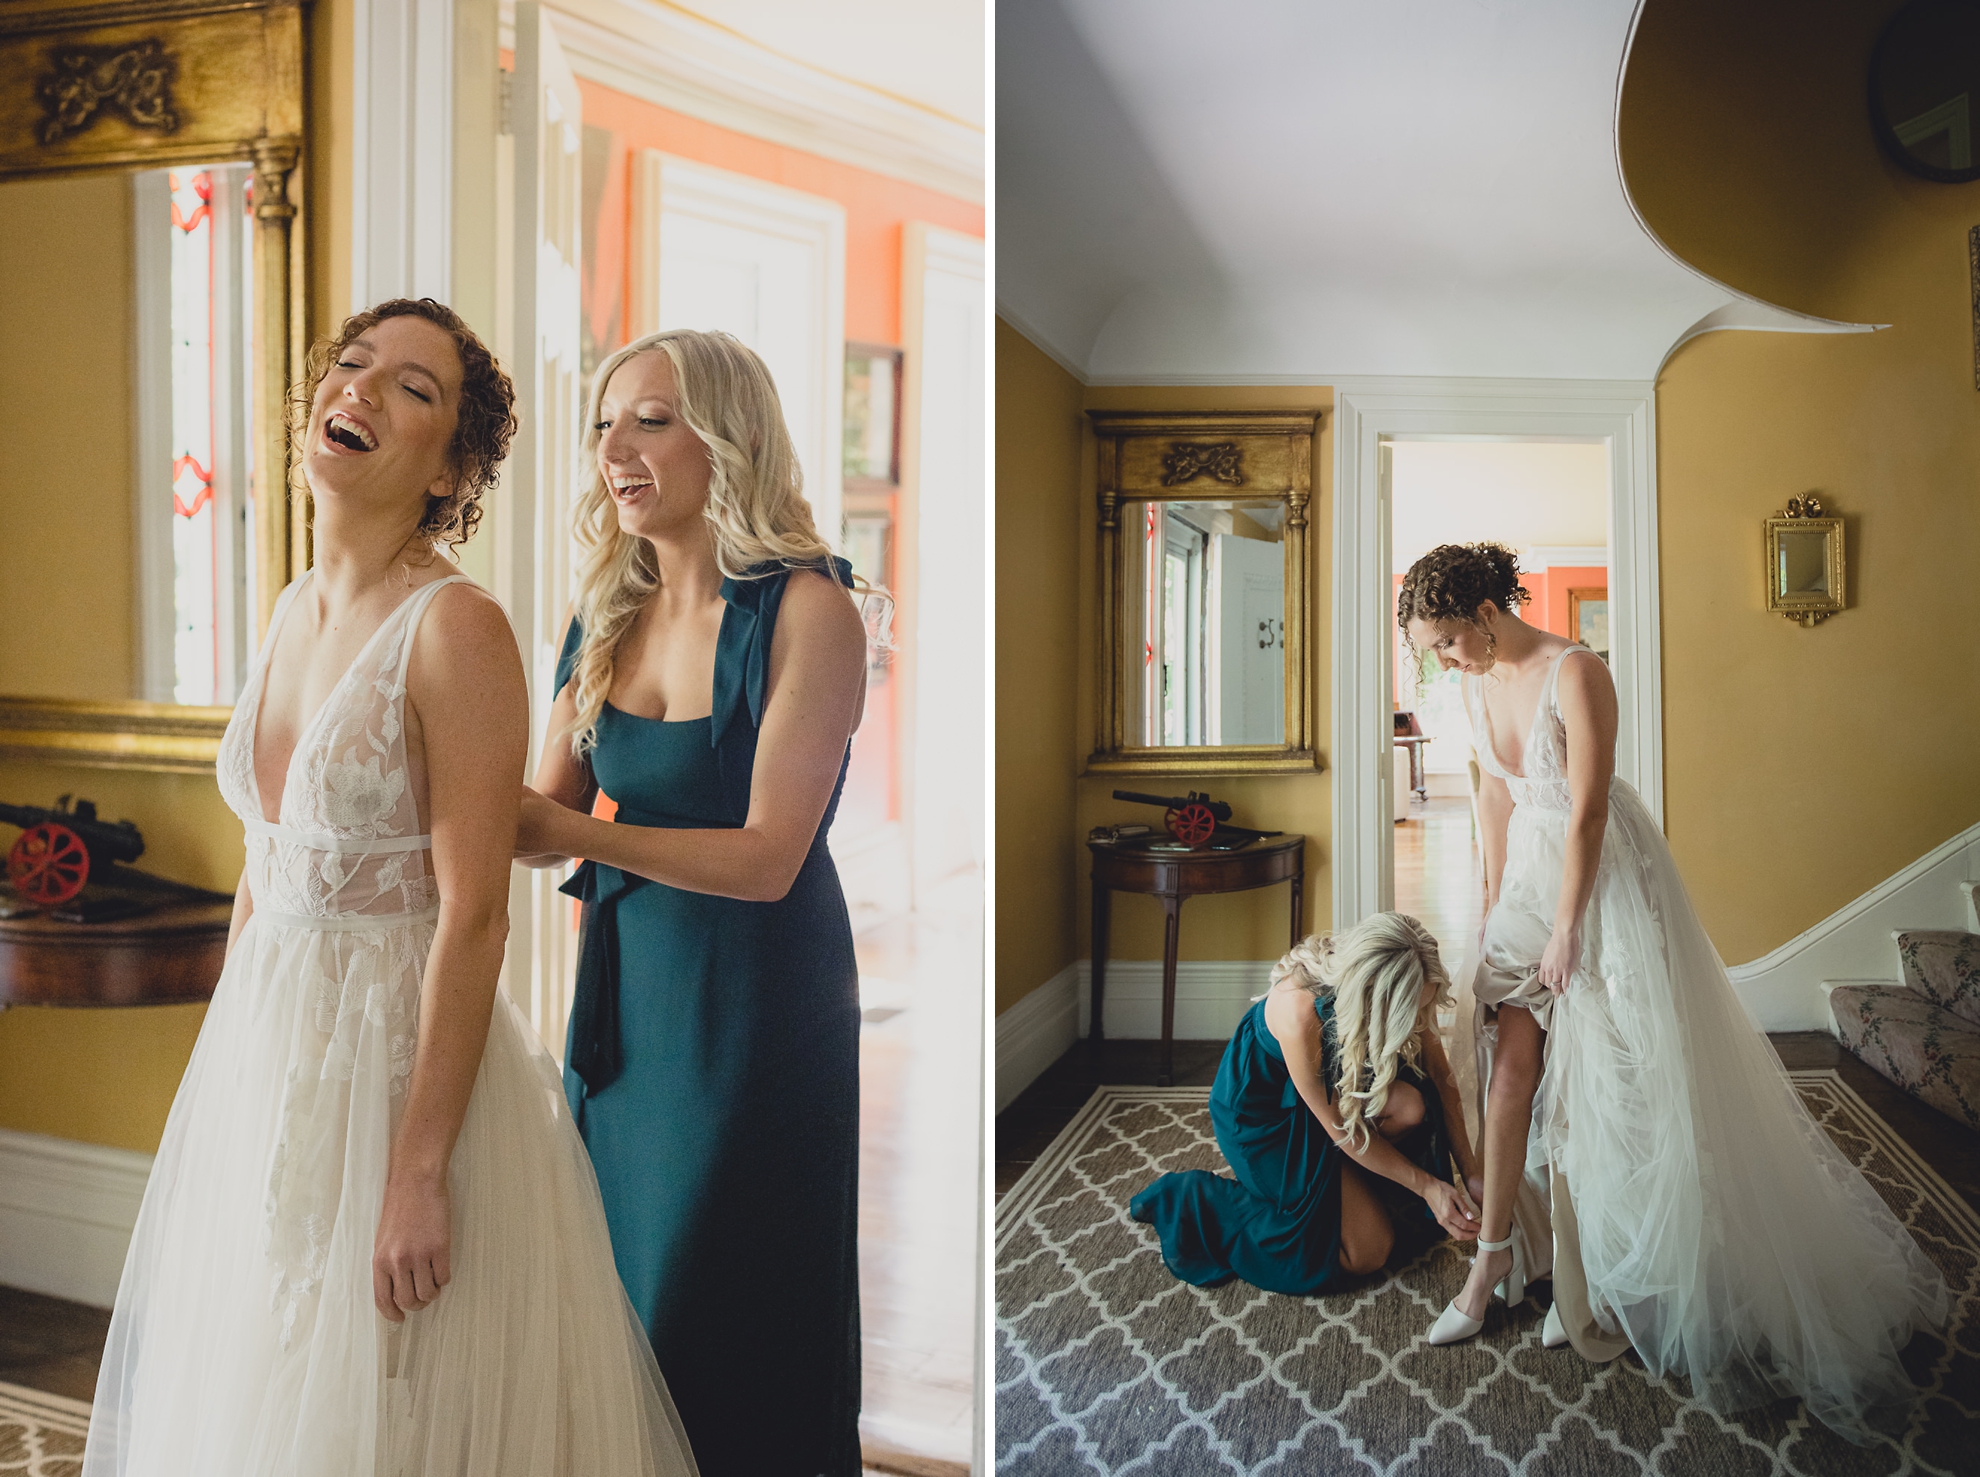 maid of honor helps bride get dressed at Barton Hill House in Lewiston, NY before wedding